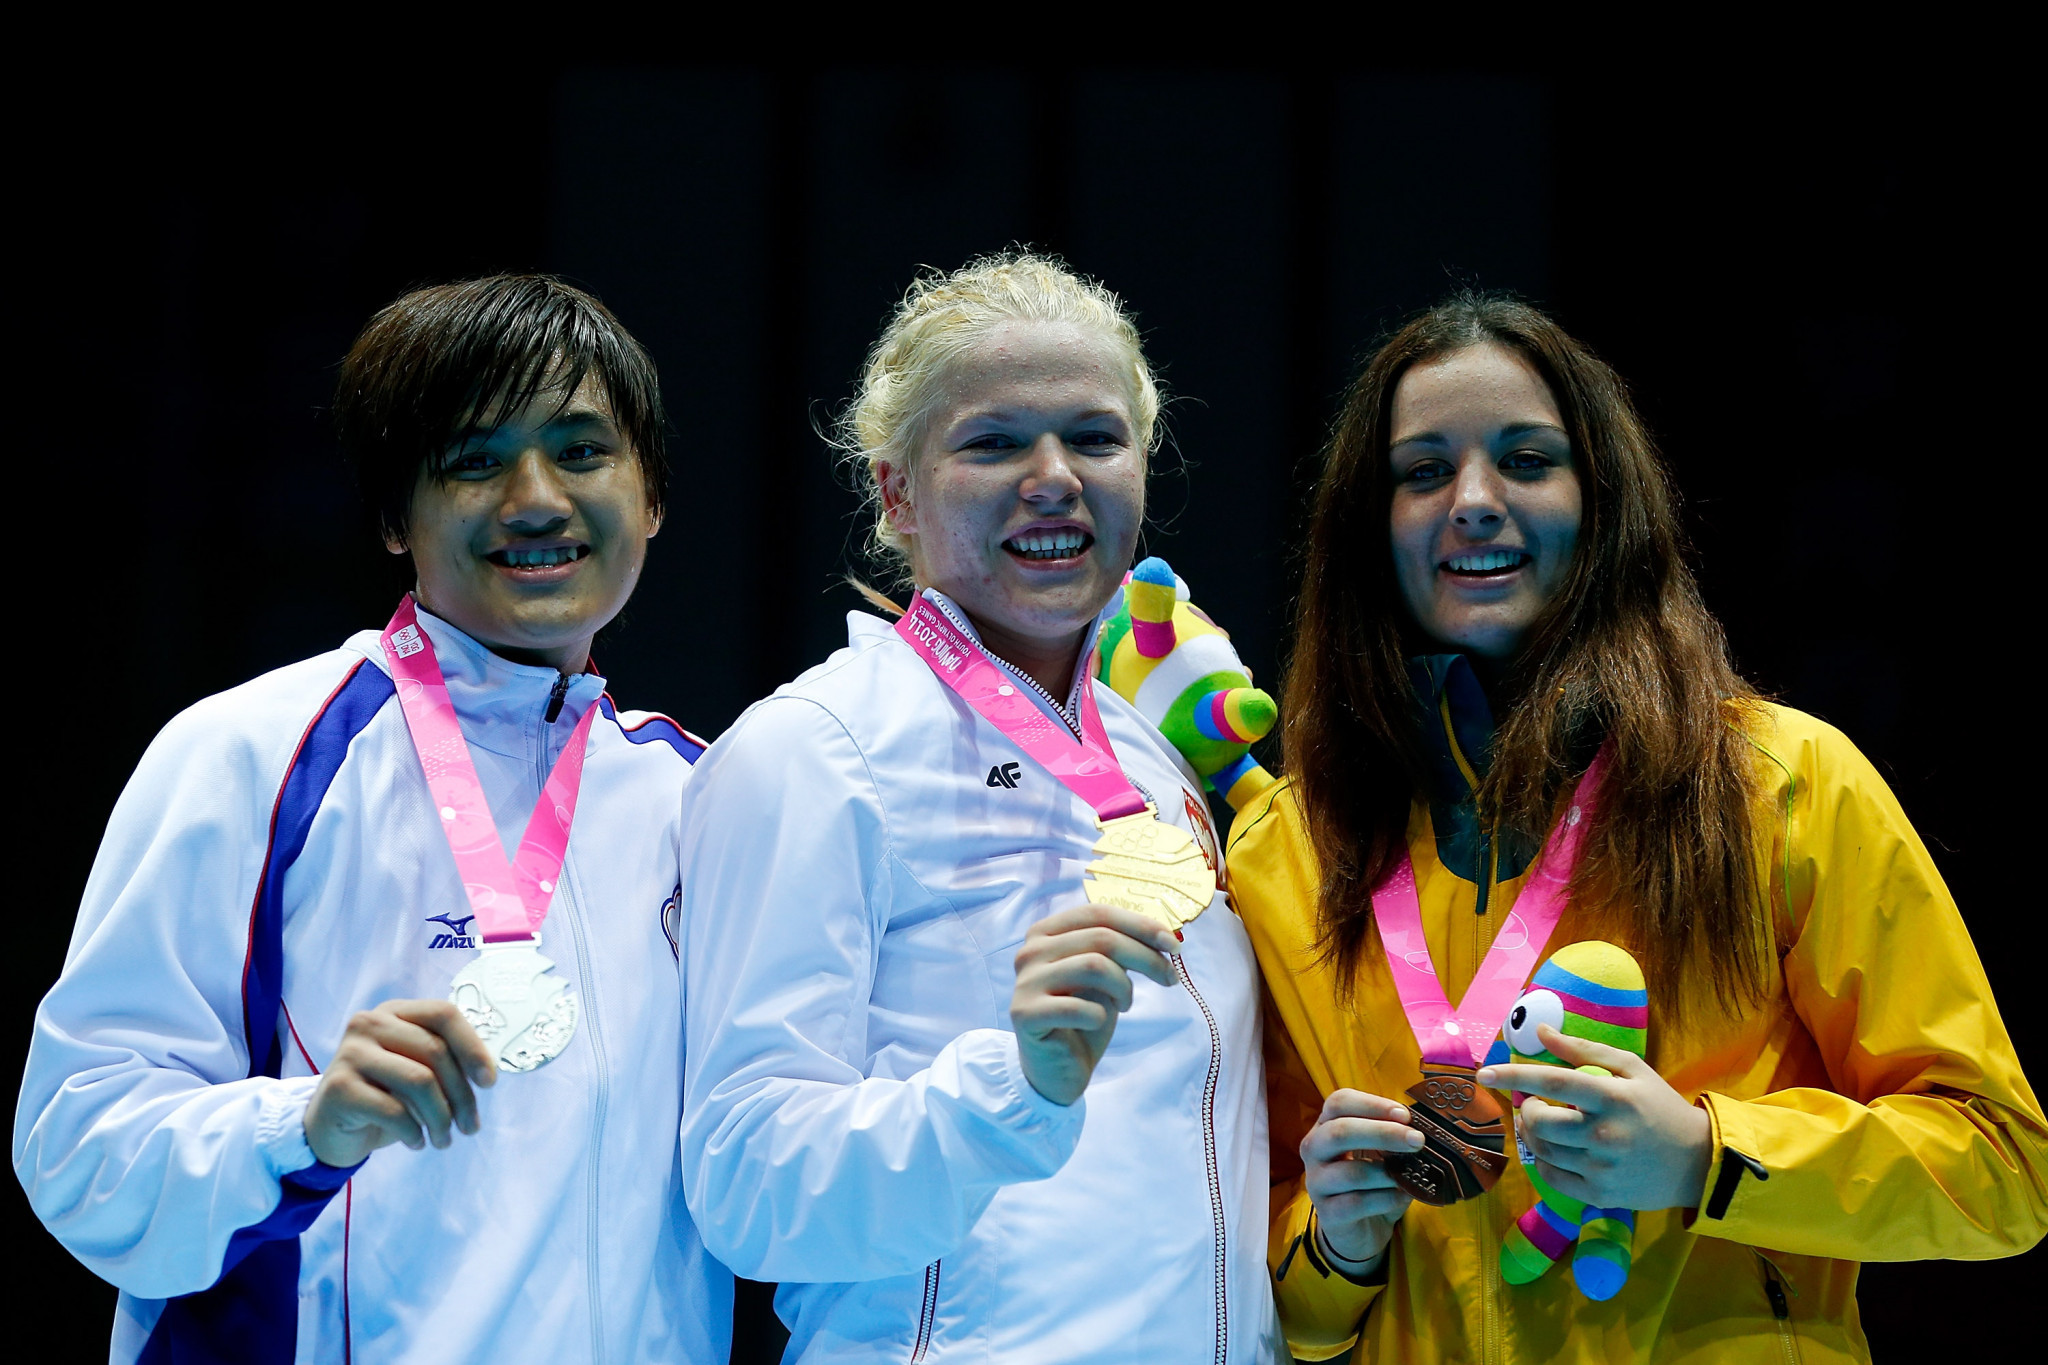 Elzbieta Wojcik won a gold medal at the Nanjing 2014 Youth Olympics during her junior career ©Getty Images